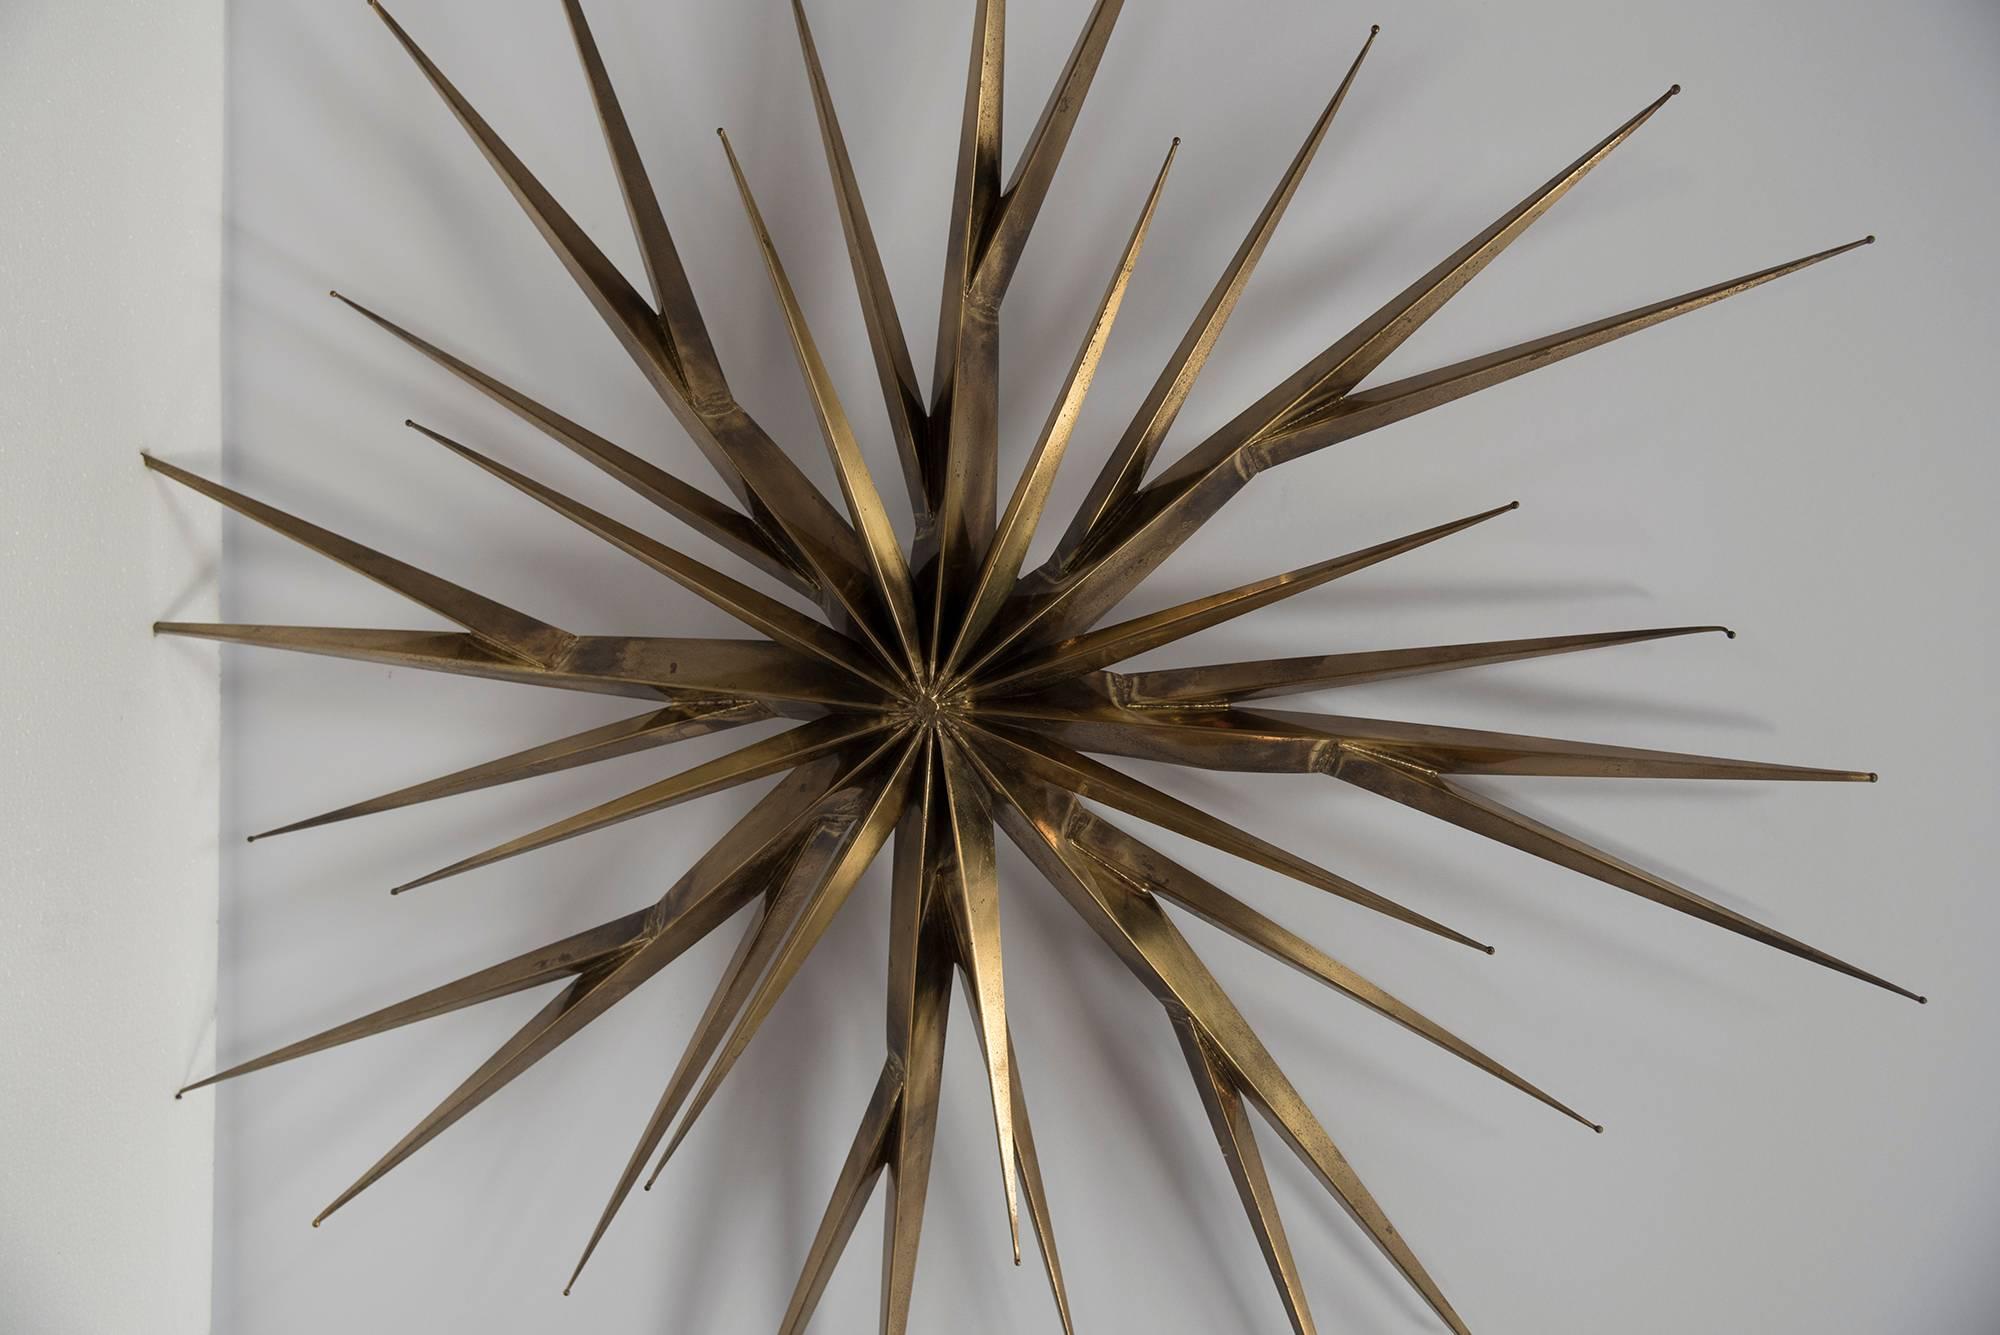 A unique starburst sculpture by Curtis Jere. Though the name Curtis Jeré is familiar to many as the maker of ebullient and eccentric modern design from the 1960s and 1970s, relatively few are aware that it is a pseudonym for the design team of